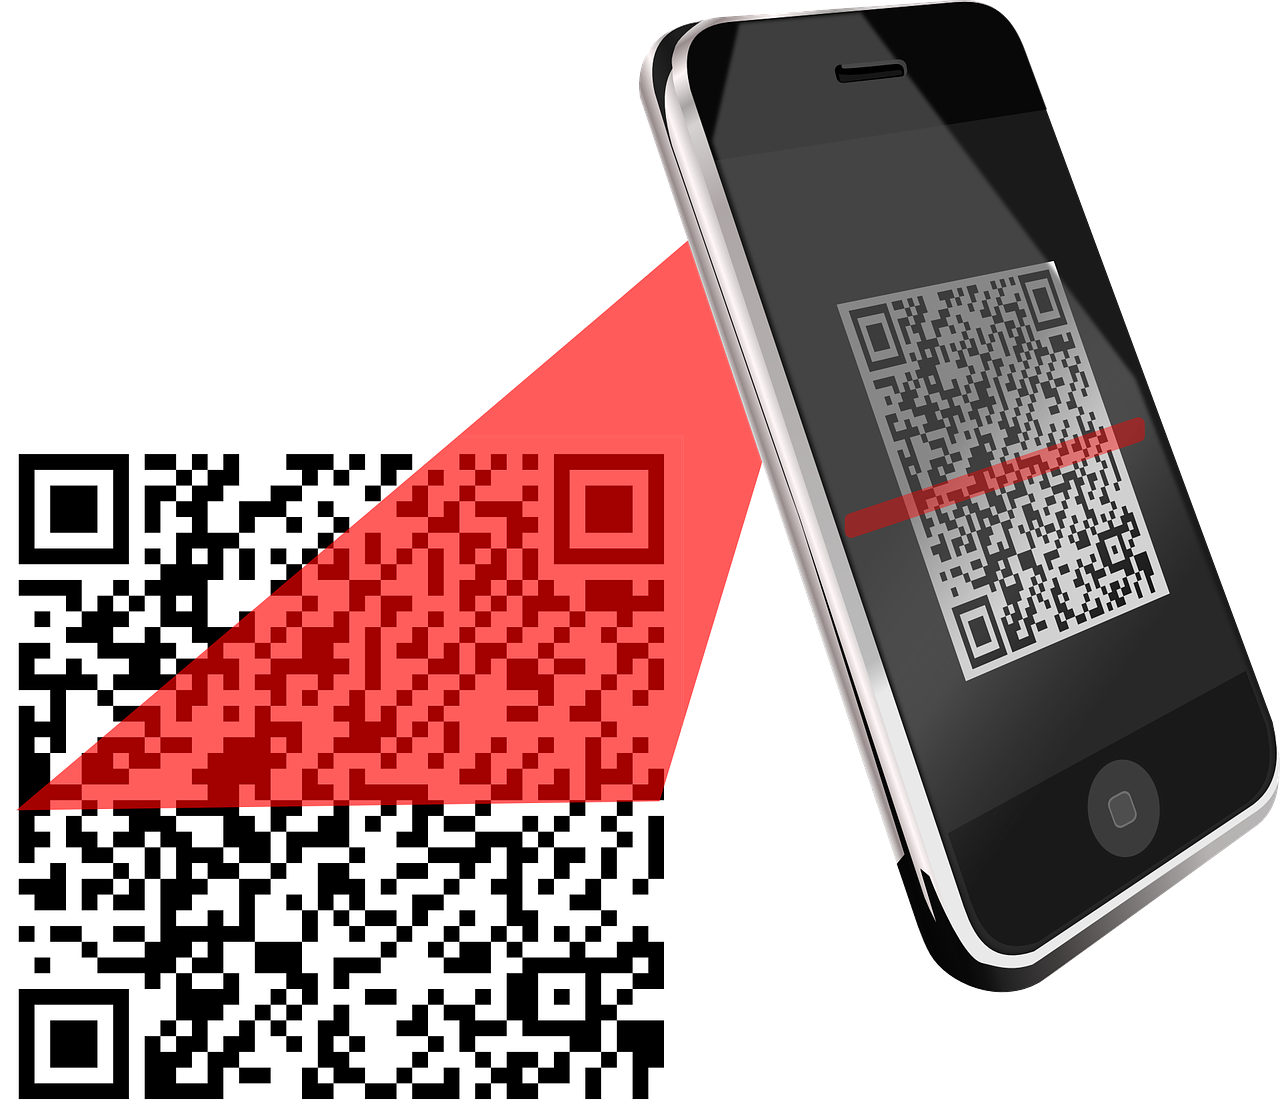 How to change an image into QR code?